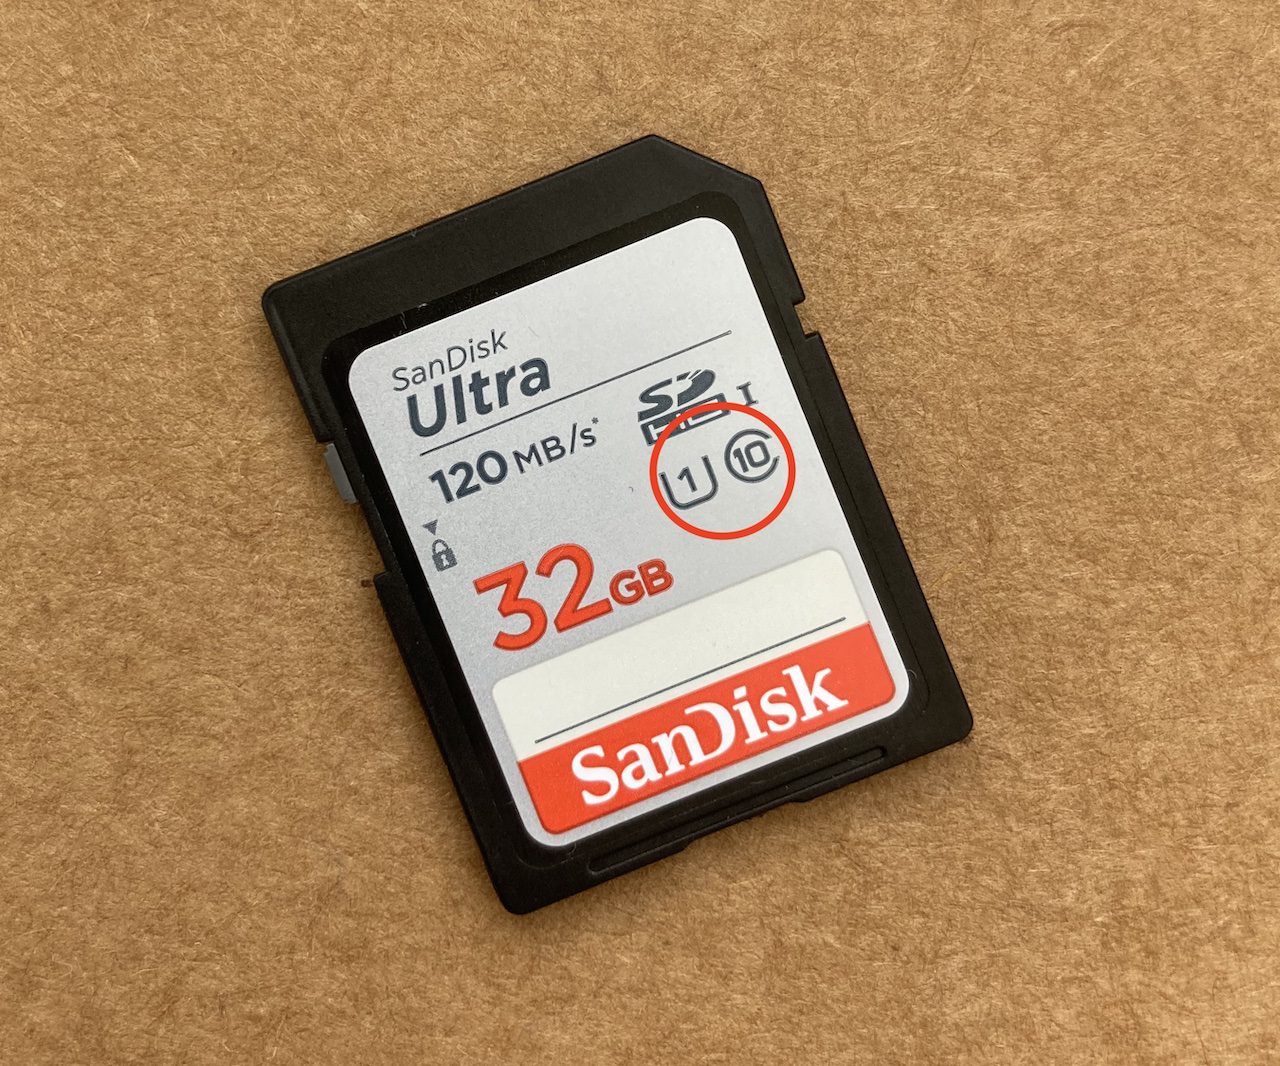 SD card with speed class highlighted